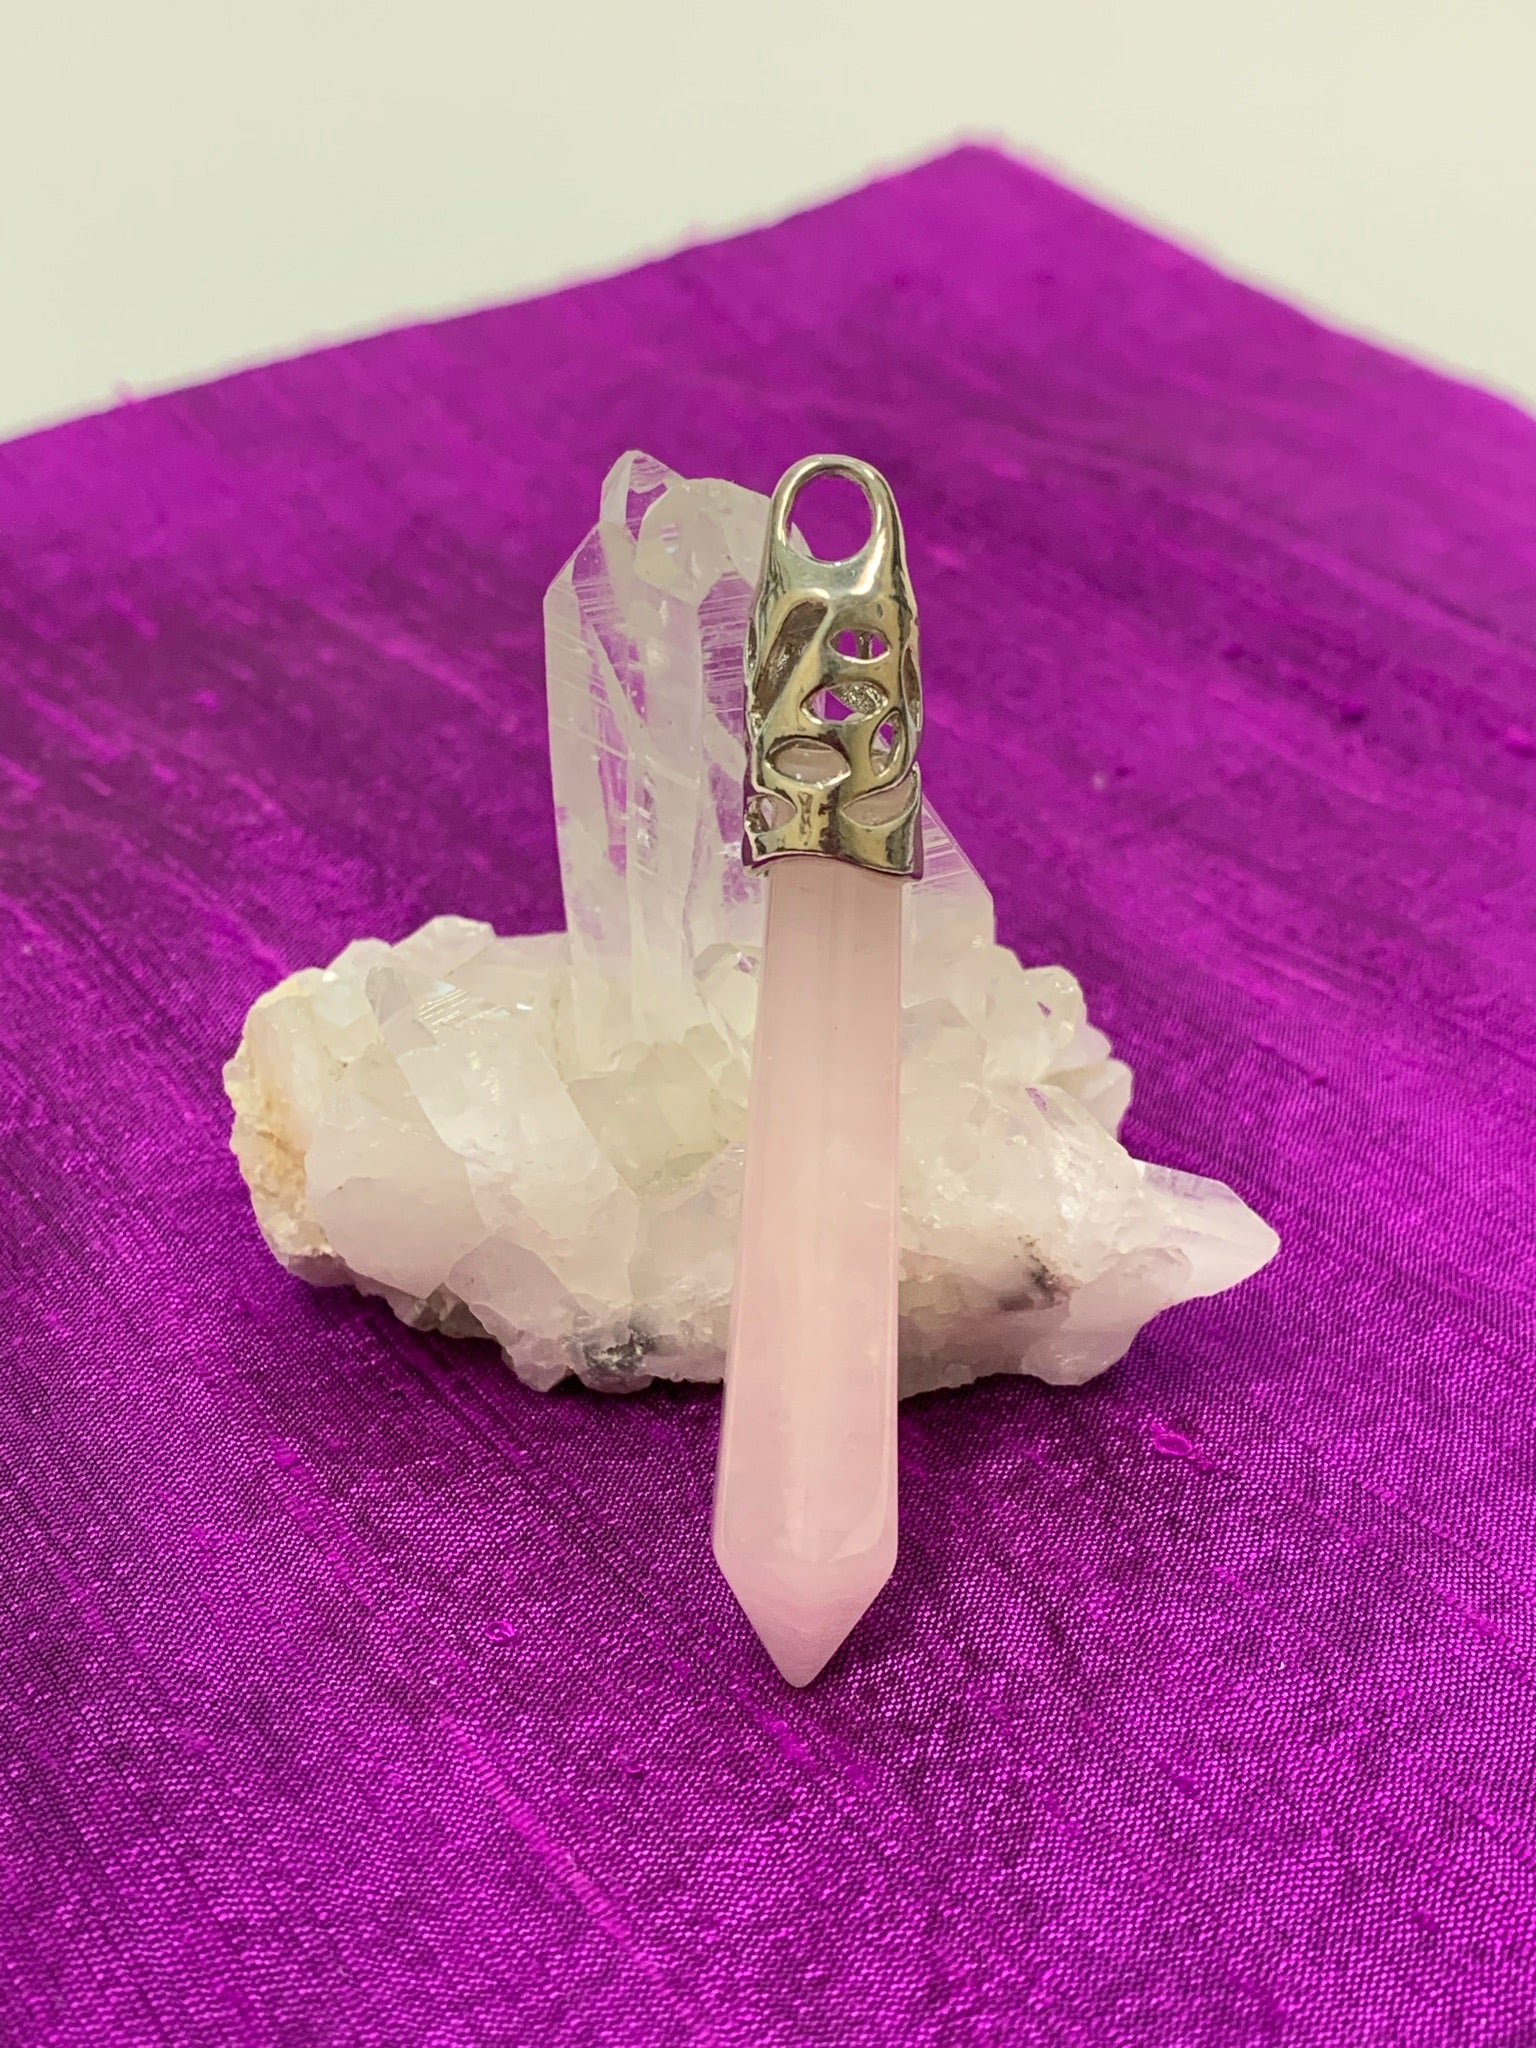 Long rose quartz crystal point is set in a fancy silver-plated bail (not sterling silver) for this powerful pendant. Rose quartz is the "stone of unconditional love & infinite peace." It opens the heart and soothes emotional distress. Perfect for wearing over your heart to take advantage of its benefits all day long. Approximately 2½-2¾".